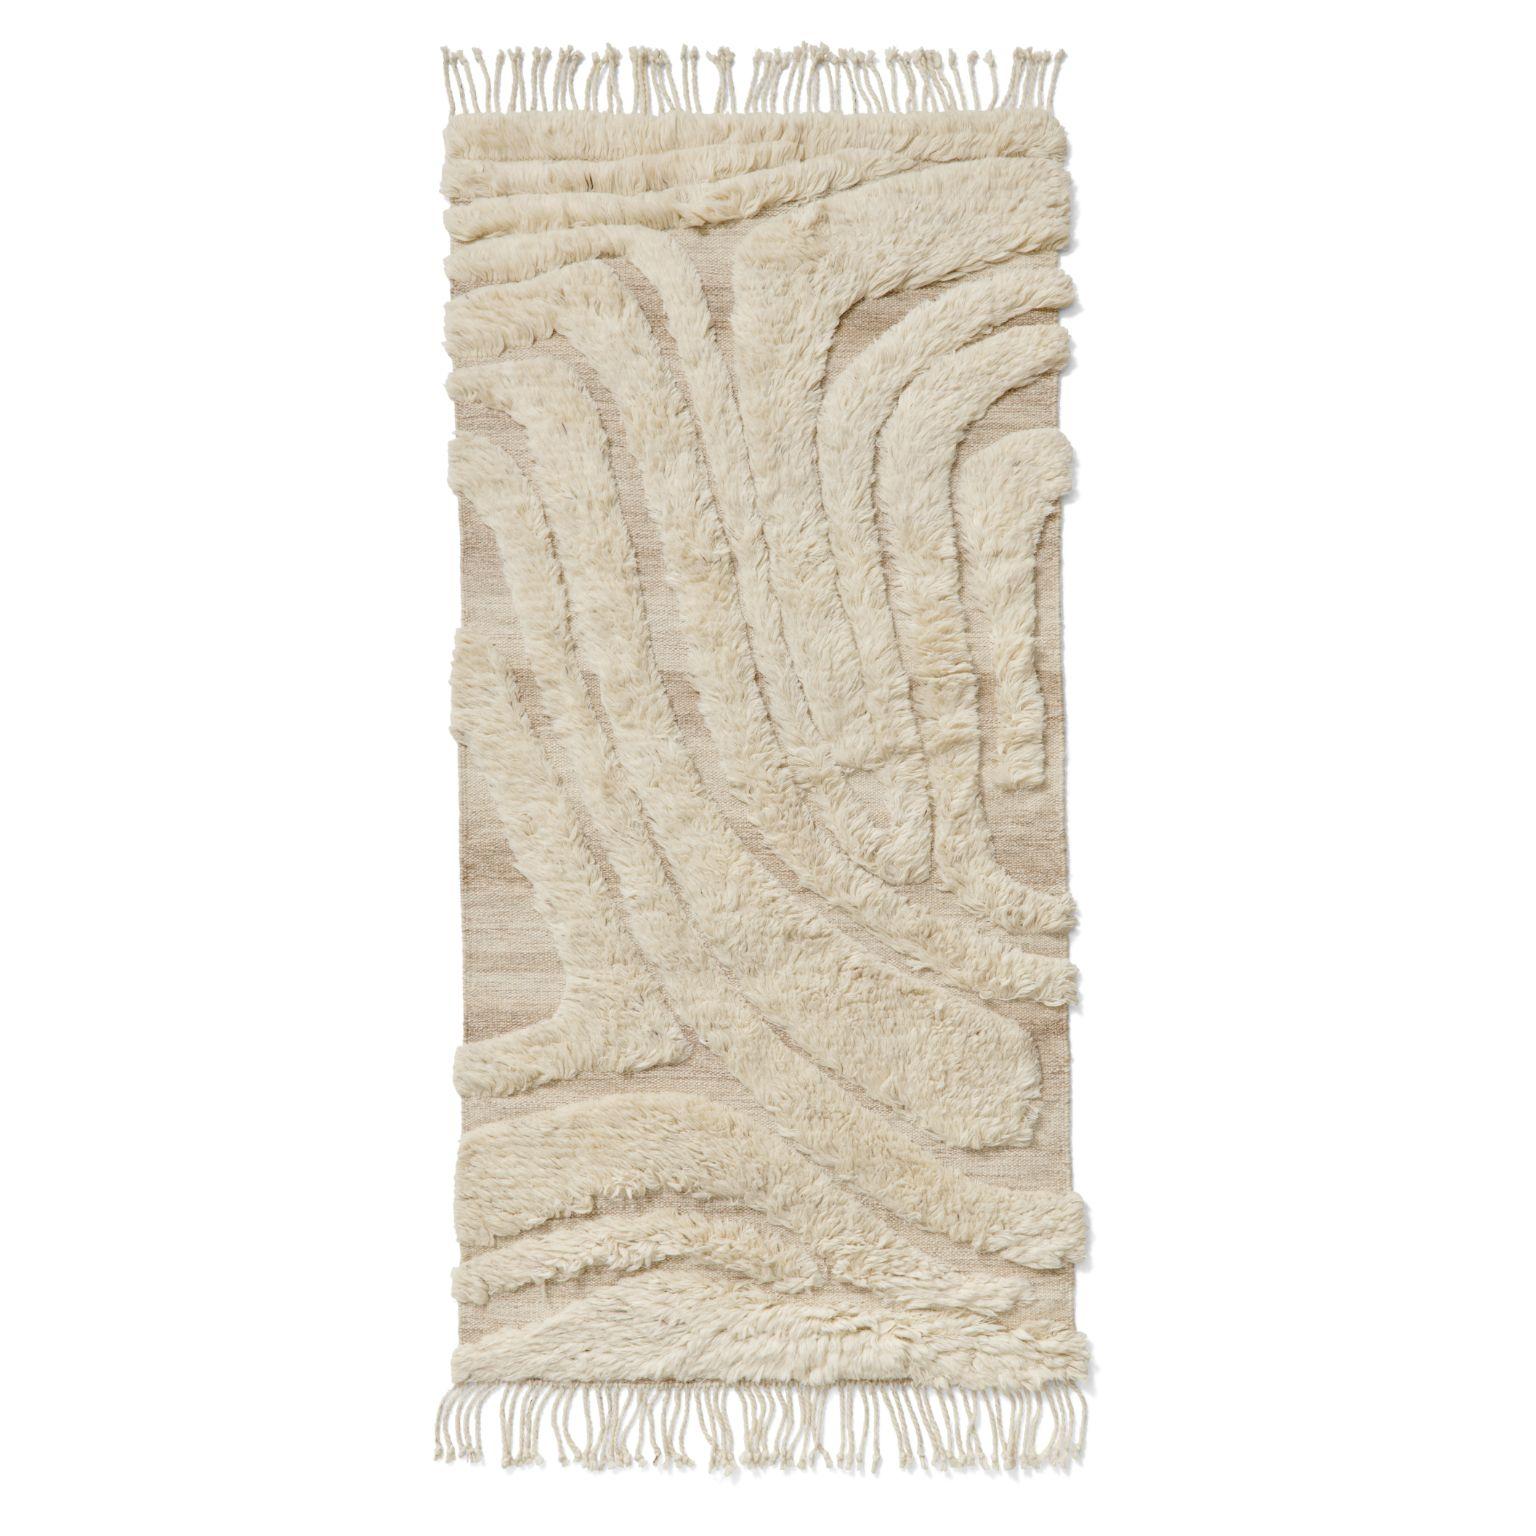 Colonnade 01 Rug by Cappelen DImyr
Dimensions: D100 x H240
Materials: 85% wool, 15% cotton

Colonnade no.01 has a soft irregular pattern that creates a vivid and intriguing feel. The rug is crafted in natural and unbleached wool in a soft